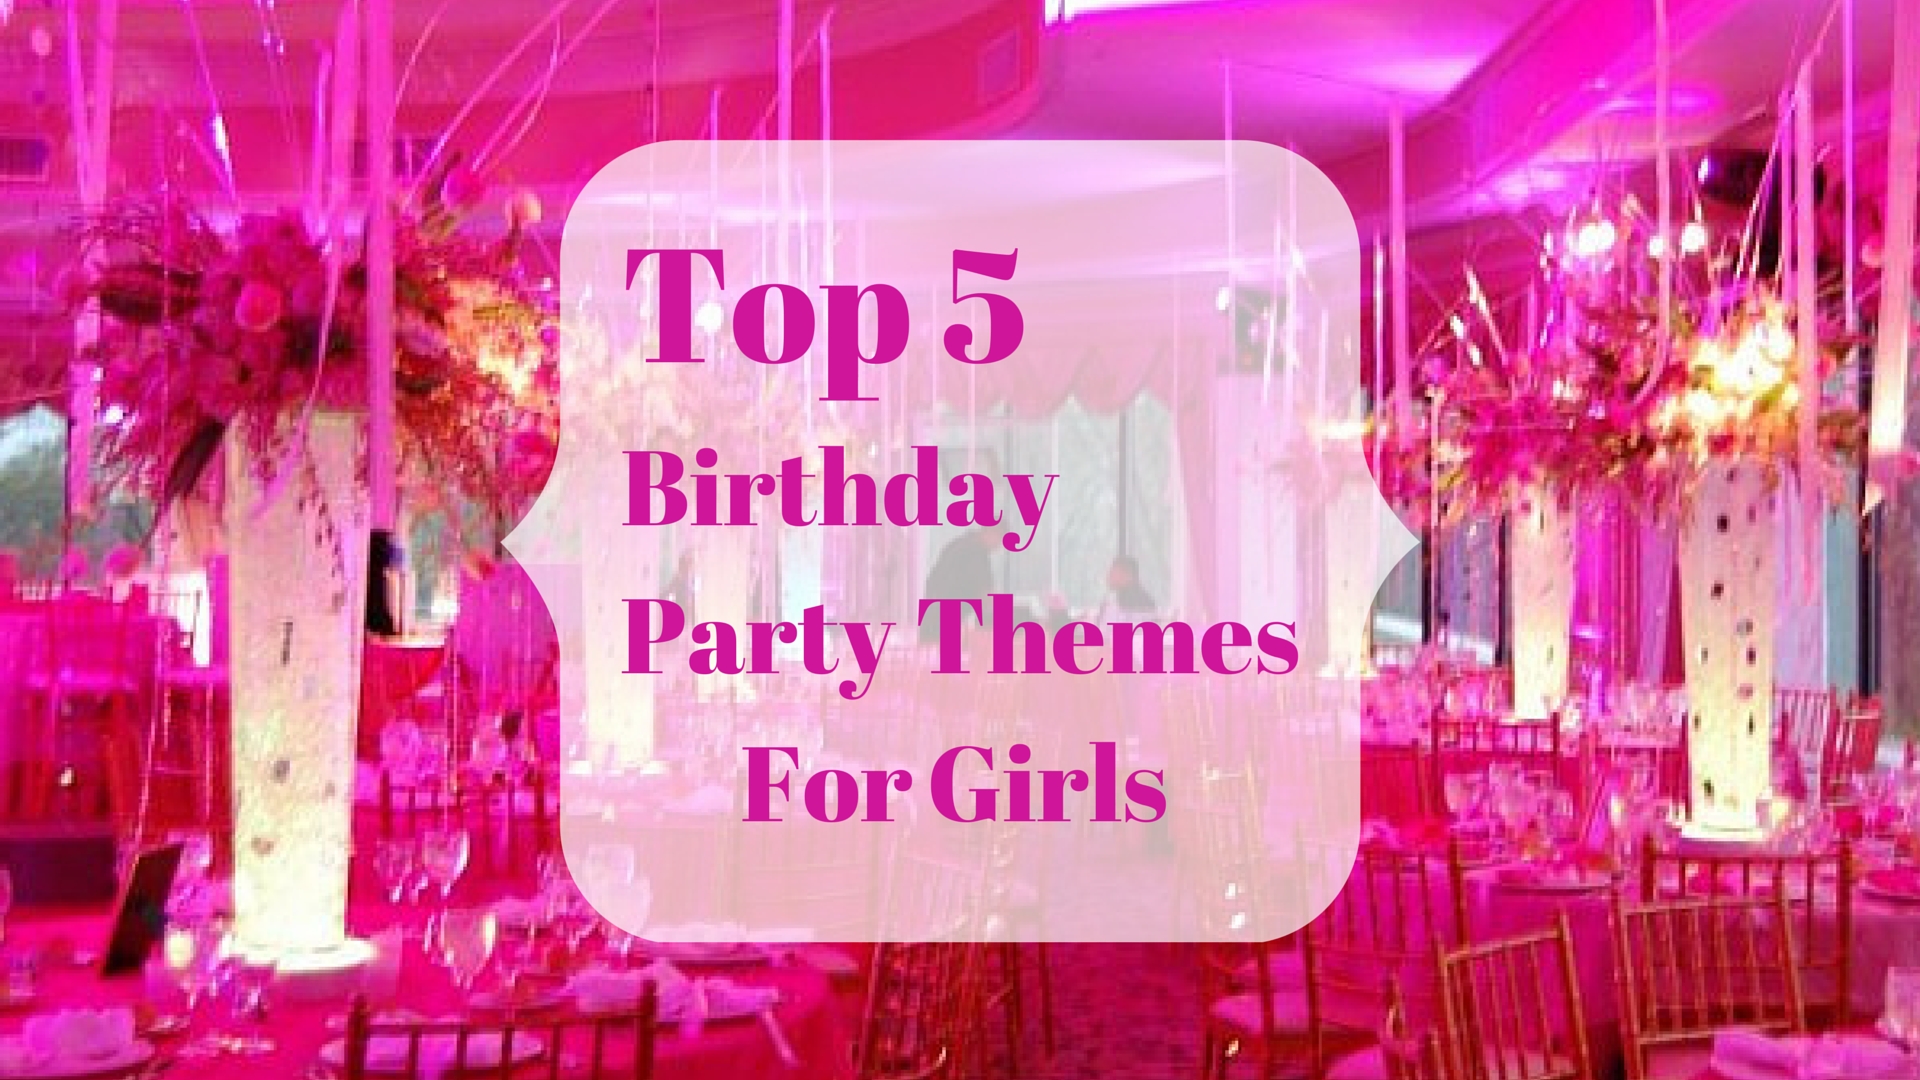 10 Most Recommended Birthday Party Theme Ideas For Girls top 5 birthday party themes for girls 1 2022